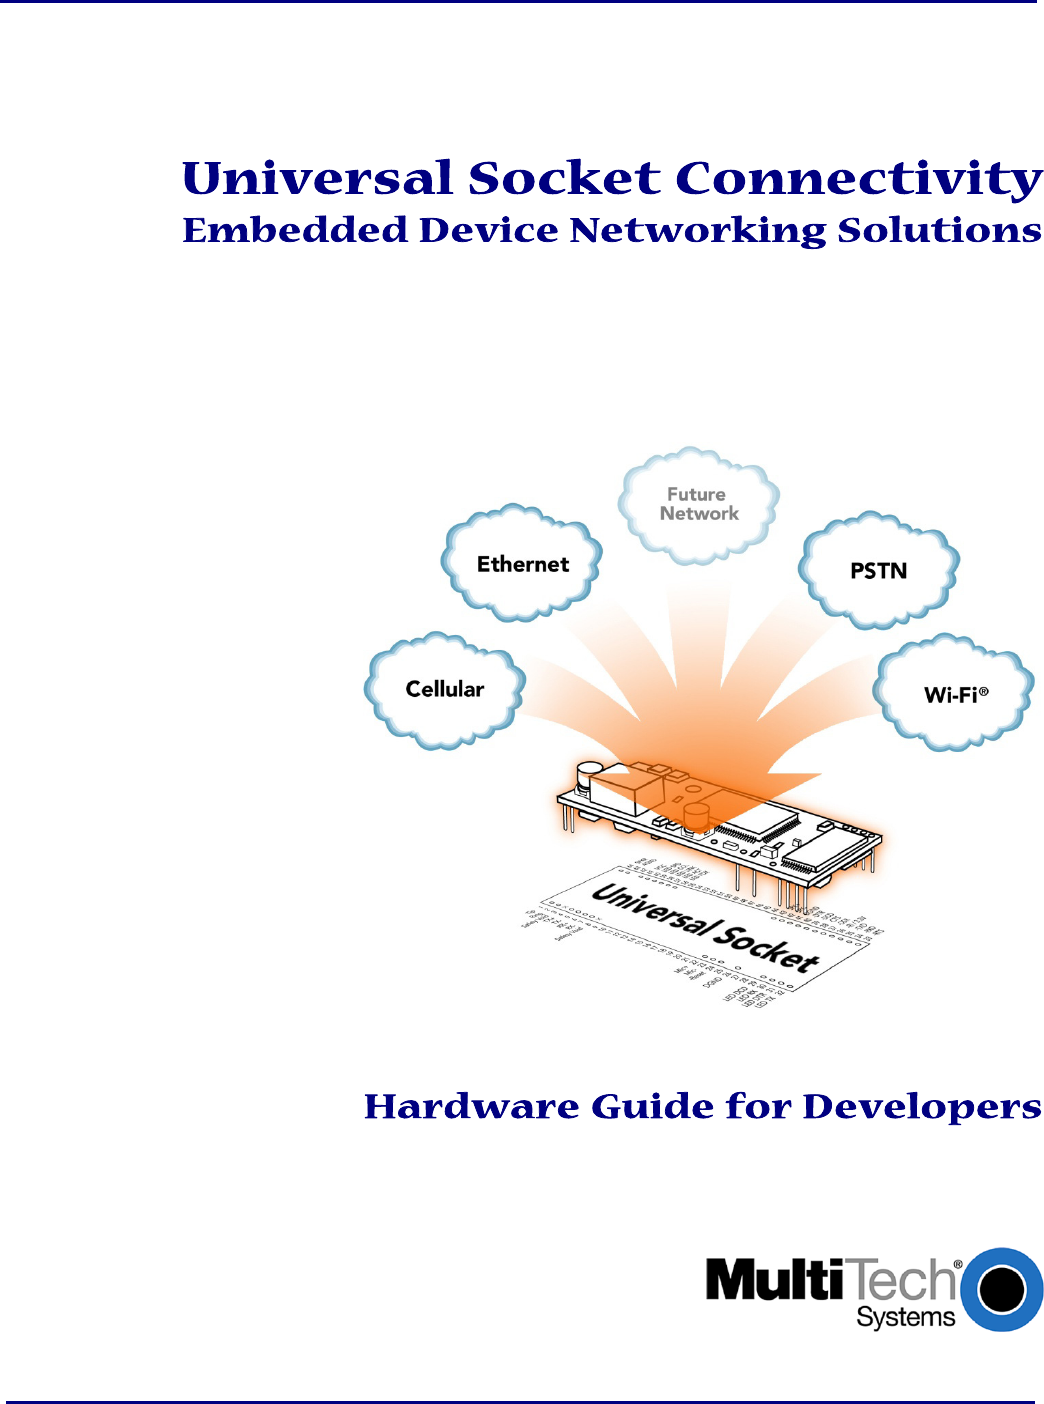              Universal Socket Connectivity   Embedded Device Networking Solutions             Hardware Guide for Developers       